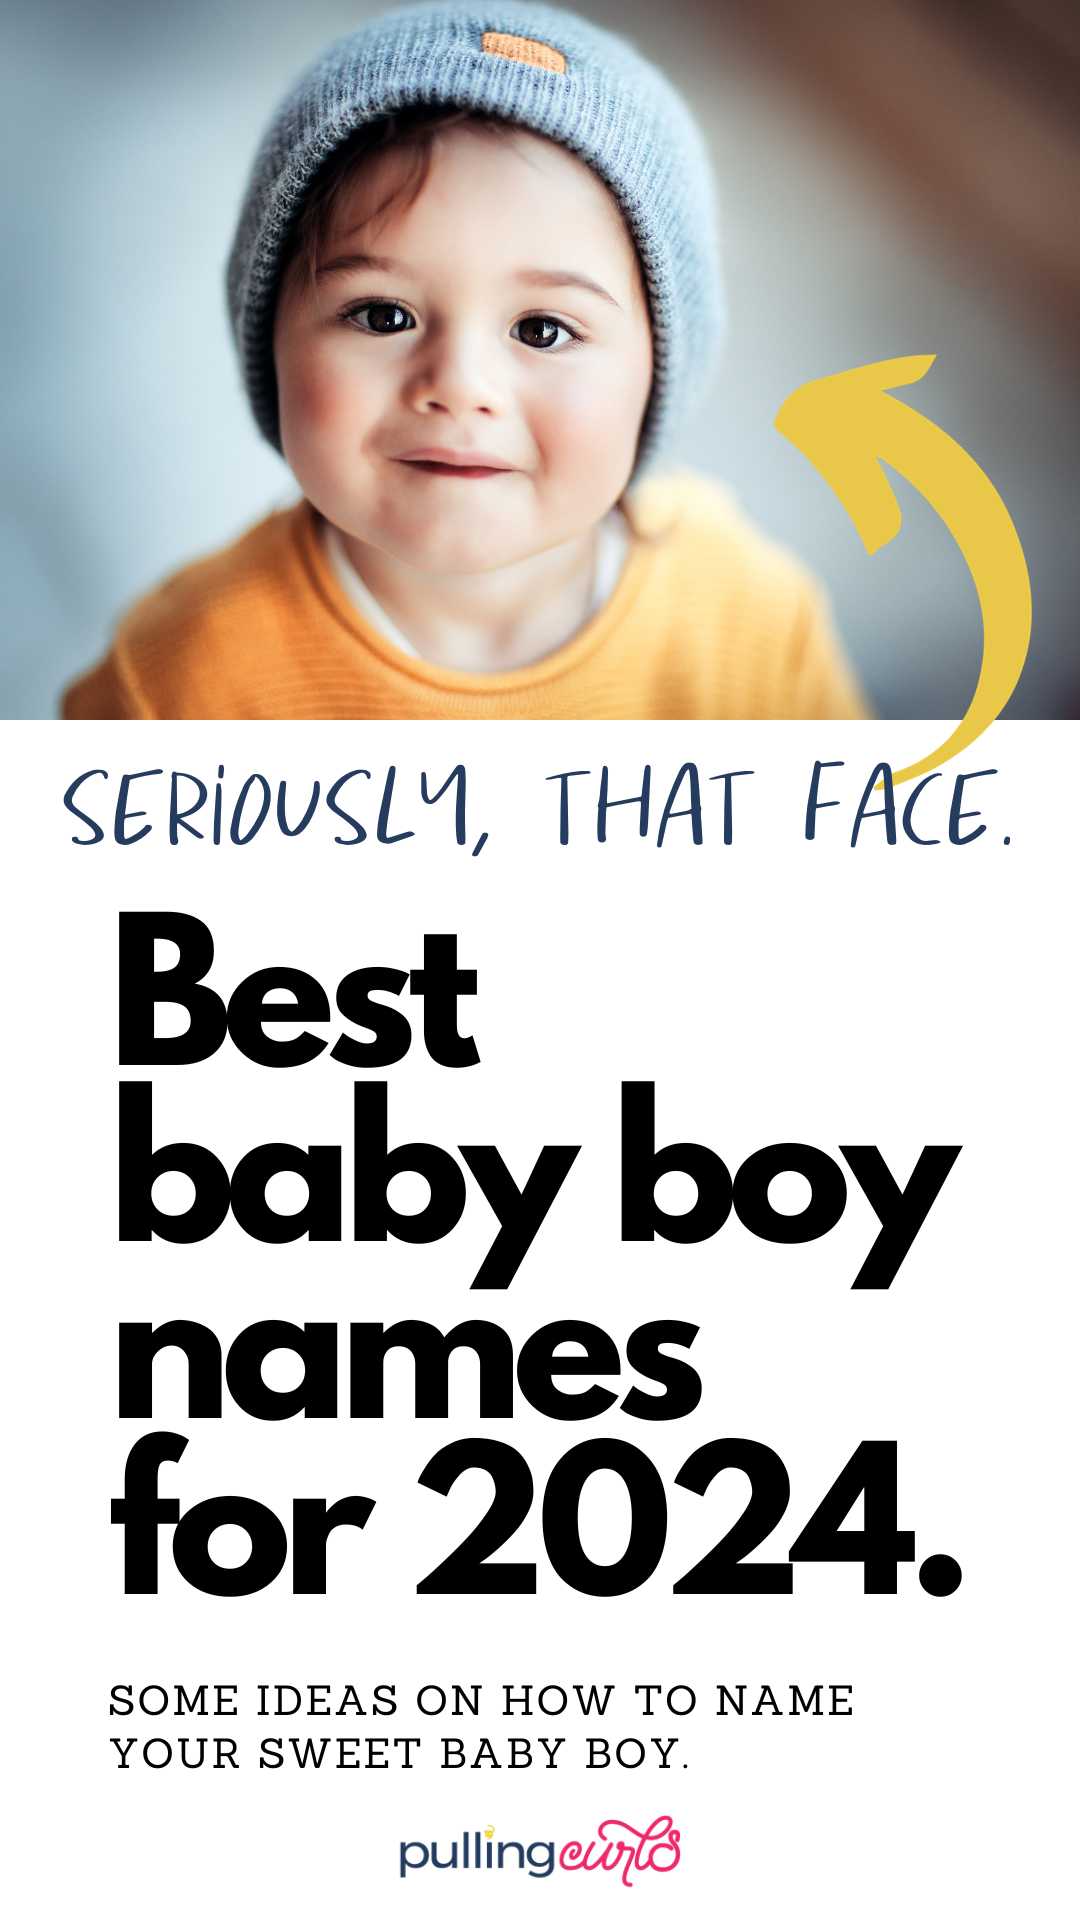 Welcome to the world of baby boy names! From timeless classics to modern gems, we're here to help you find the perfect name for your little prince. Explore our list of carefully curated names and discover inspiration from all corners of the globe. Let your baby boy's name reflect your unique taste, heritage, and dreams for their future. via @pullingcurls